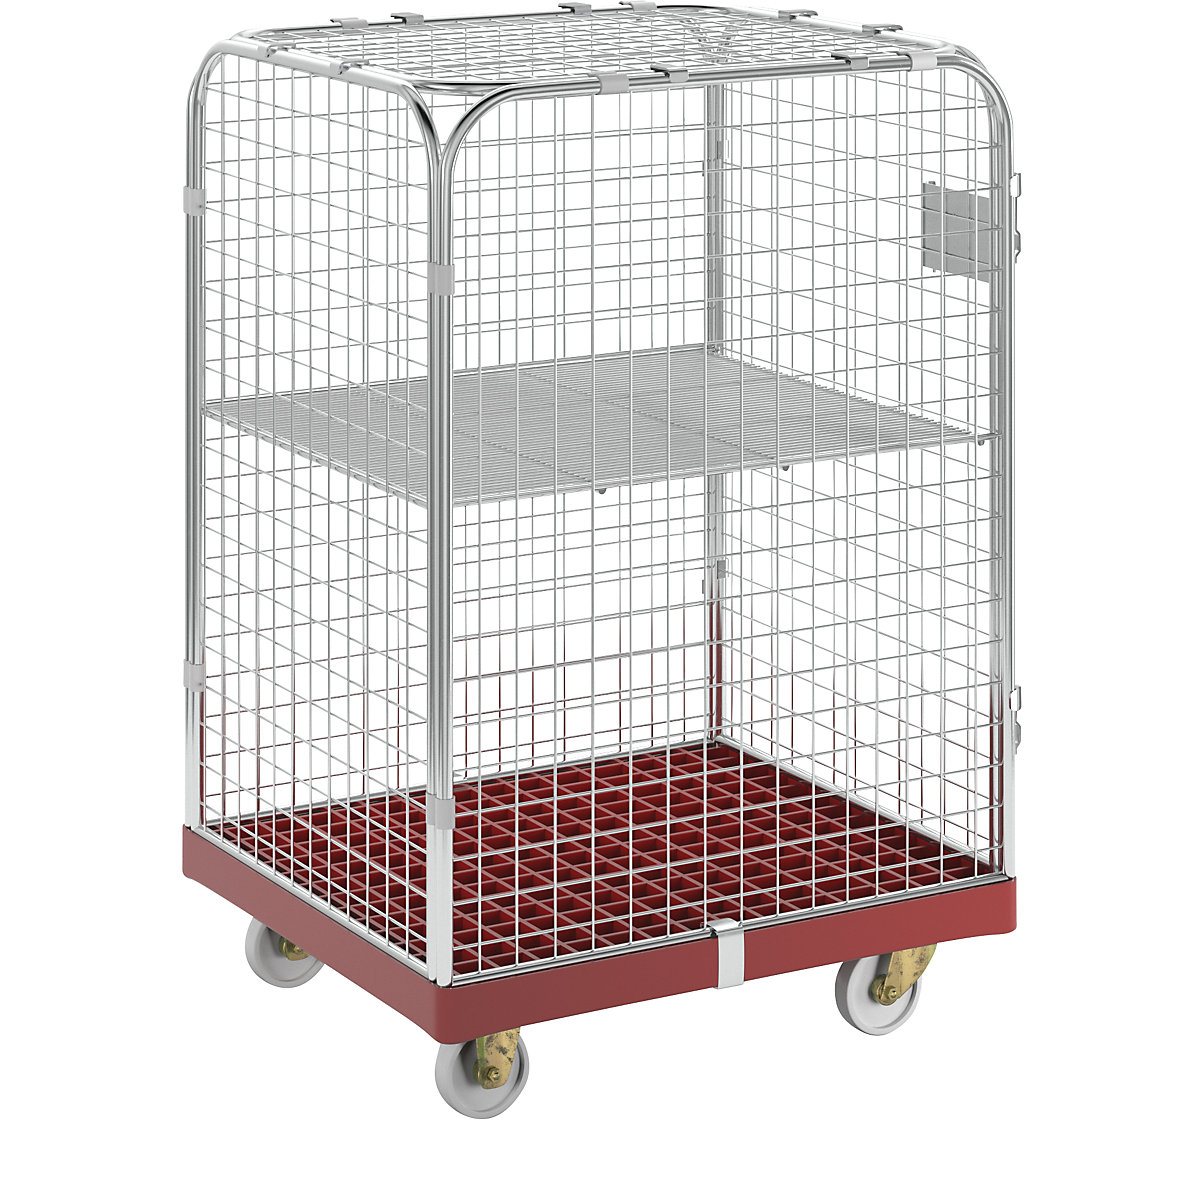 Rollcontainer SAFE, alt. x largh. x prof. 1200 x 720 x 810 mm, pianale con ruote rosso-2